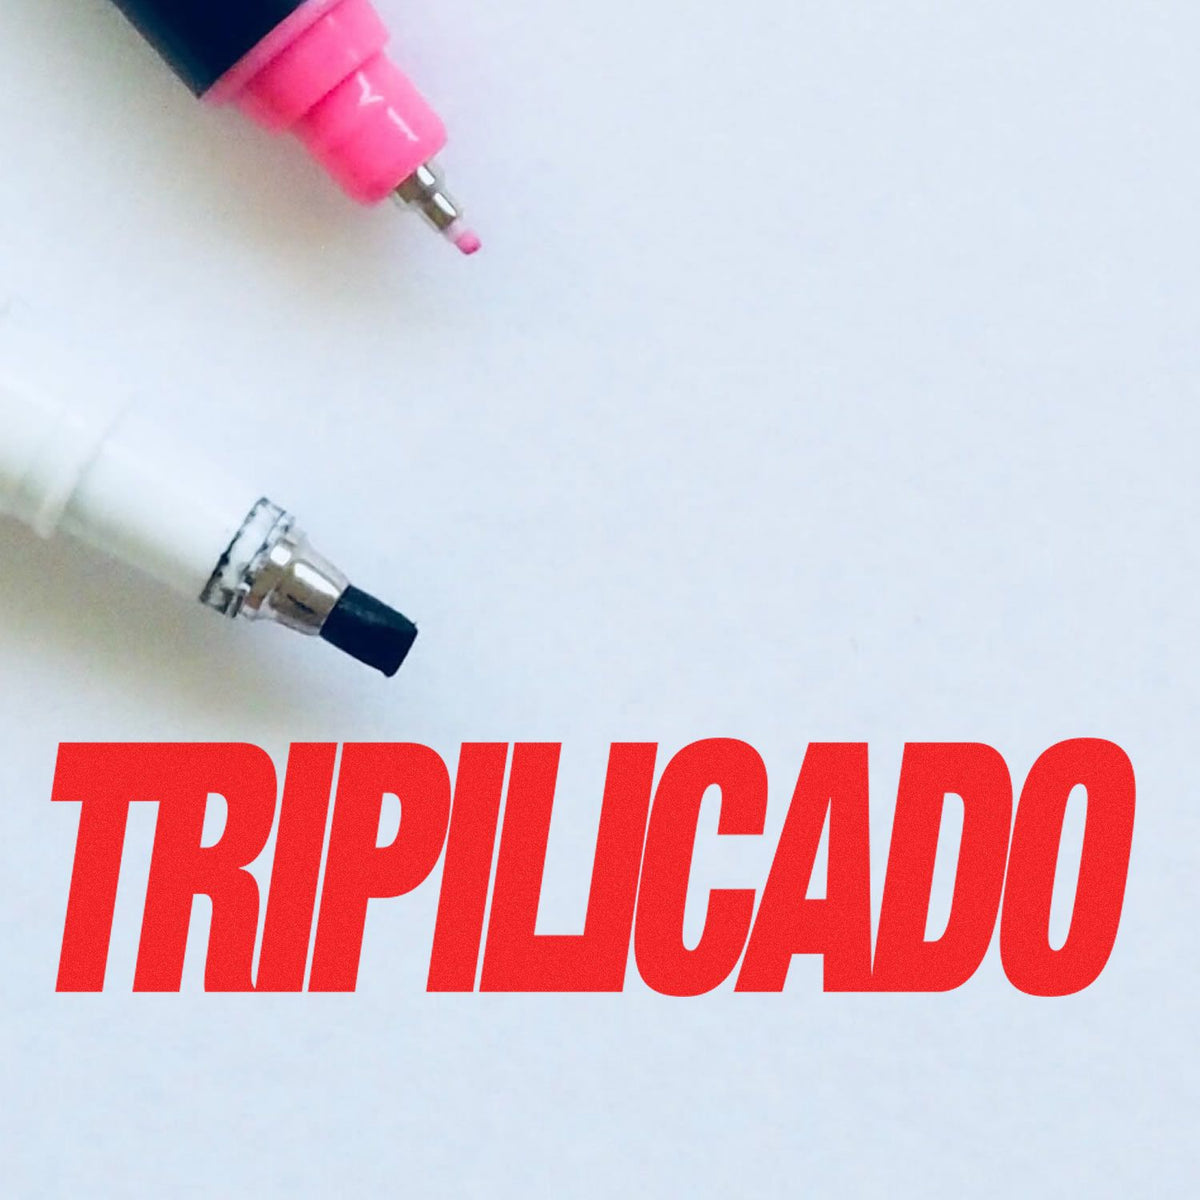 Self-Inking Tripilicado Stamp In Use Photo